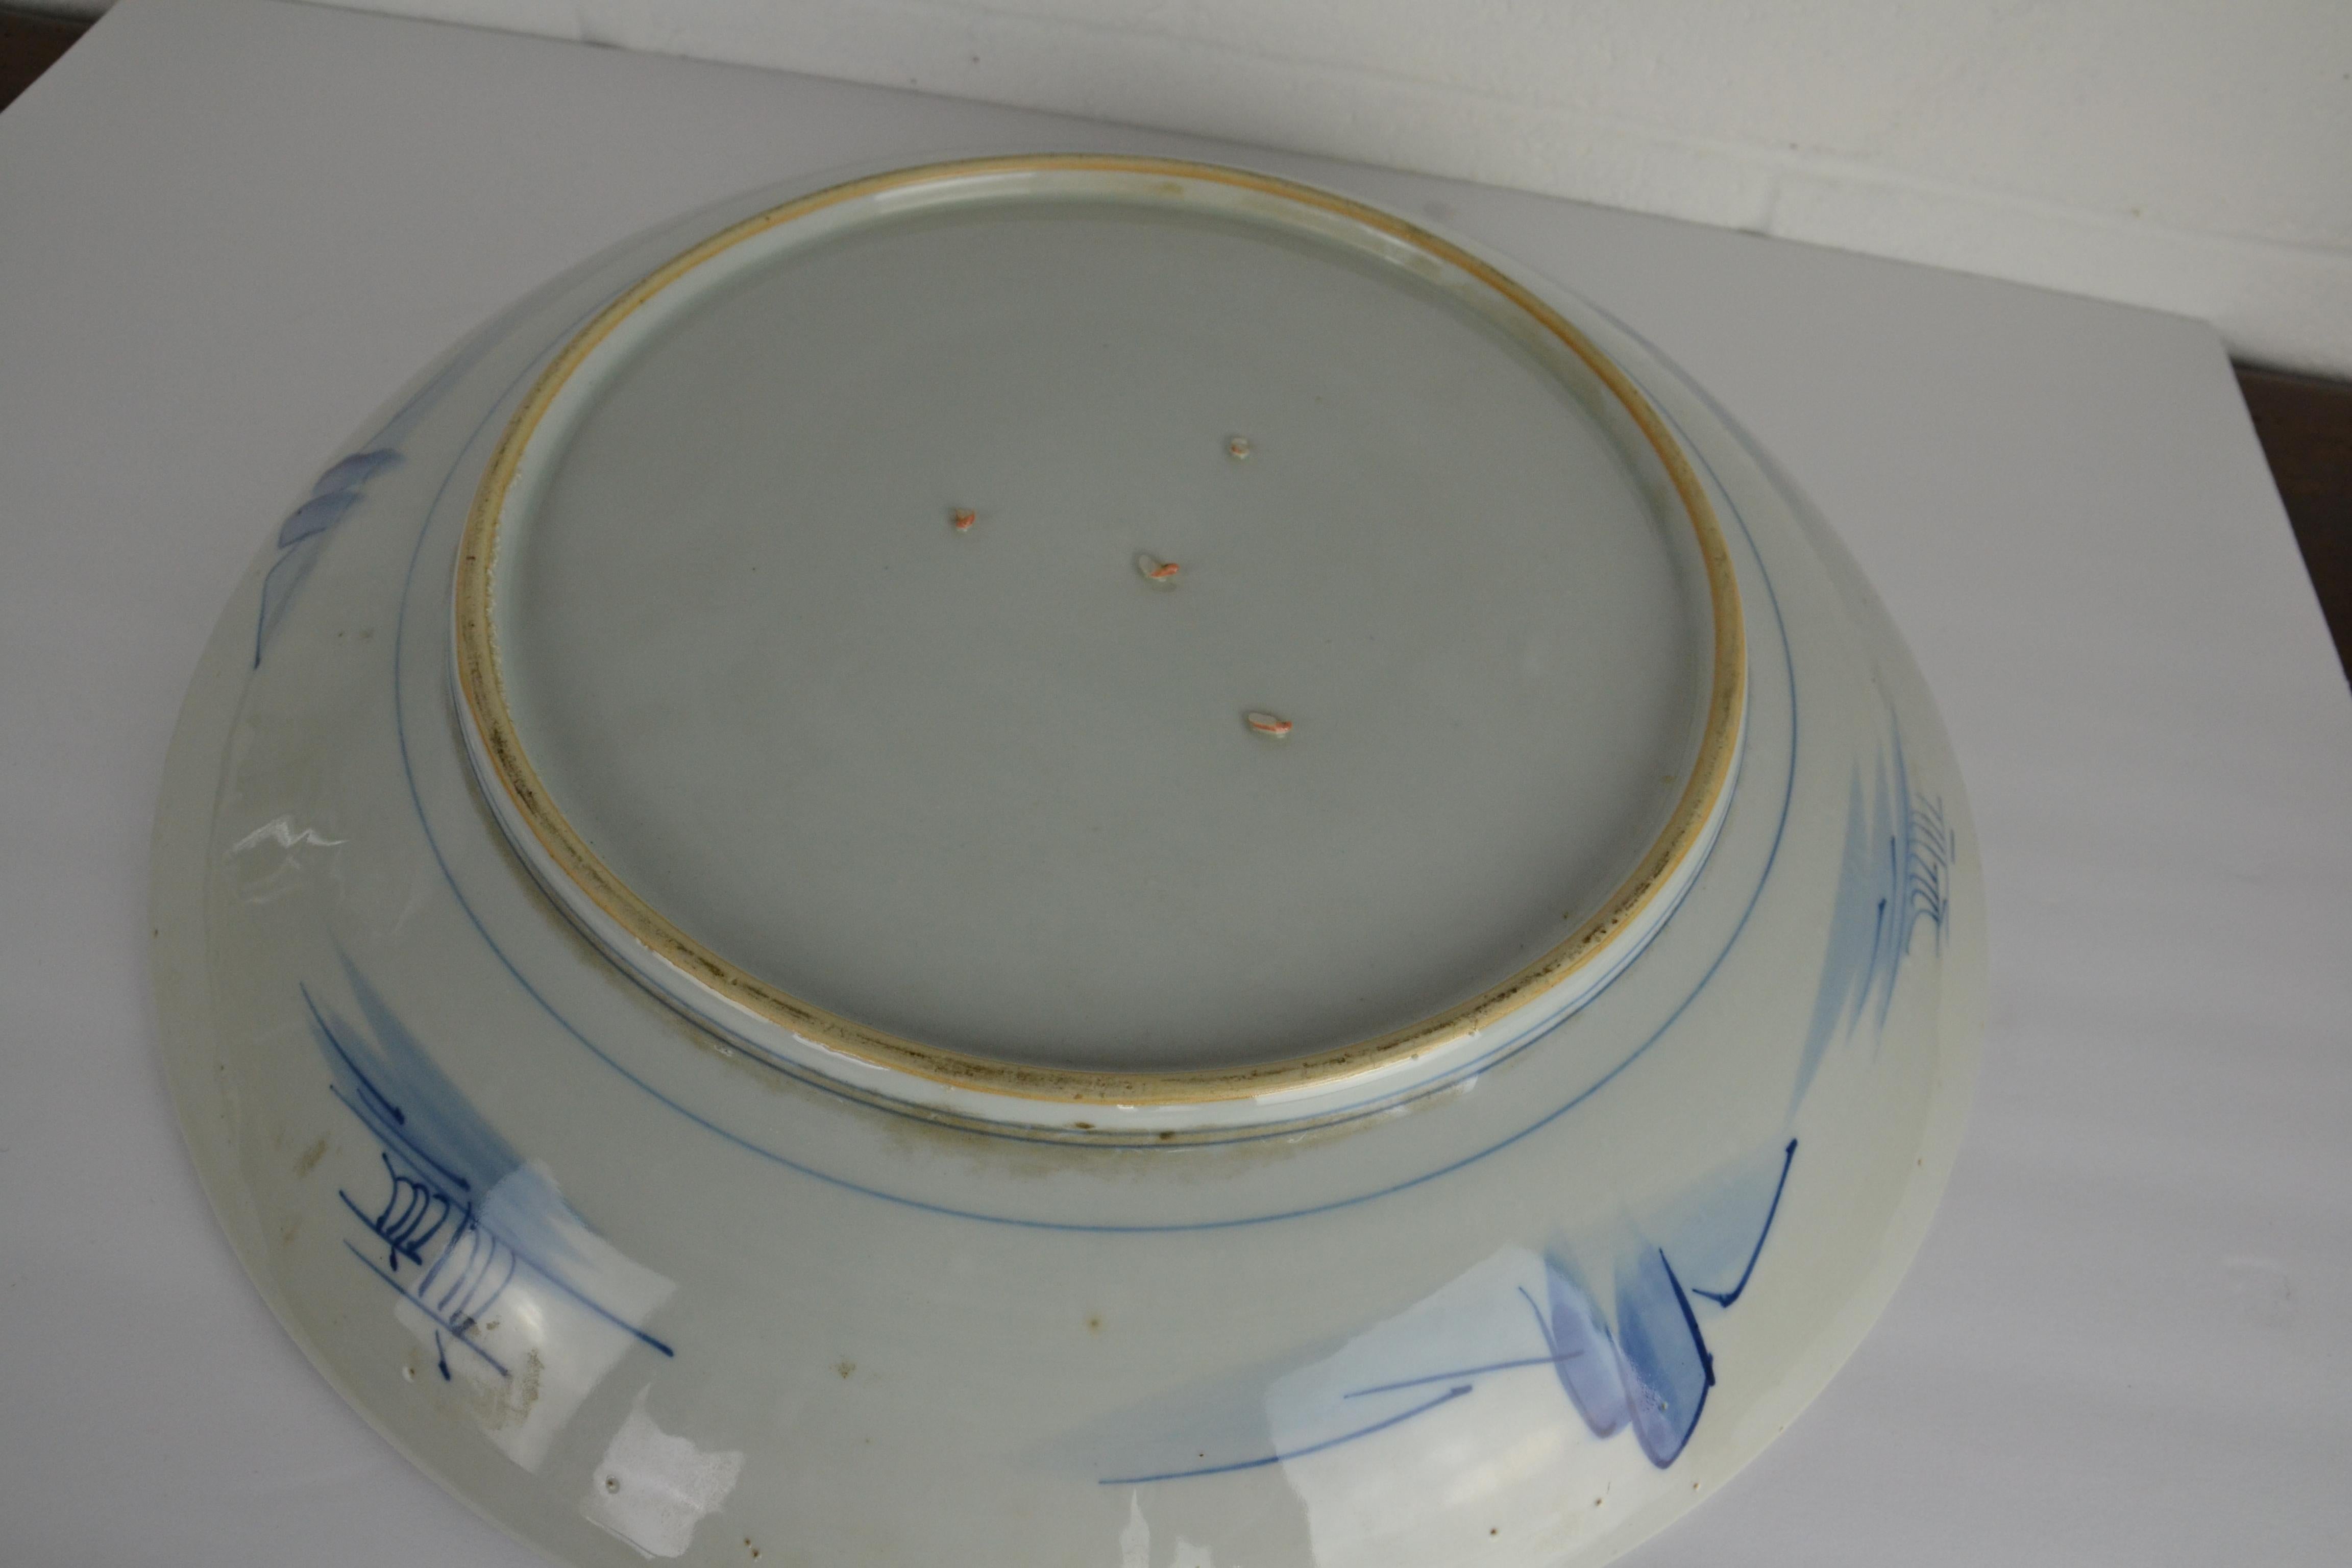 Late 19th Century 19th Century Japanese Platter / Charger